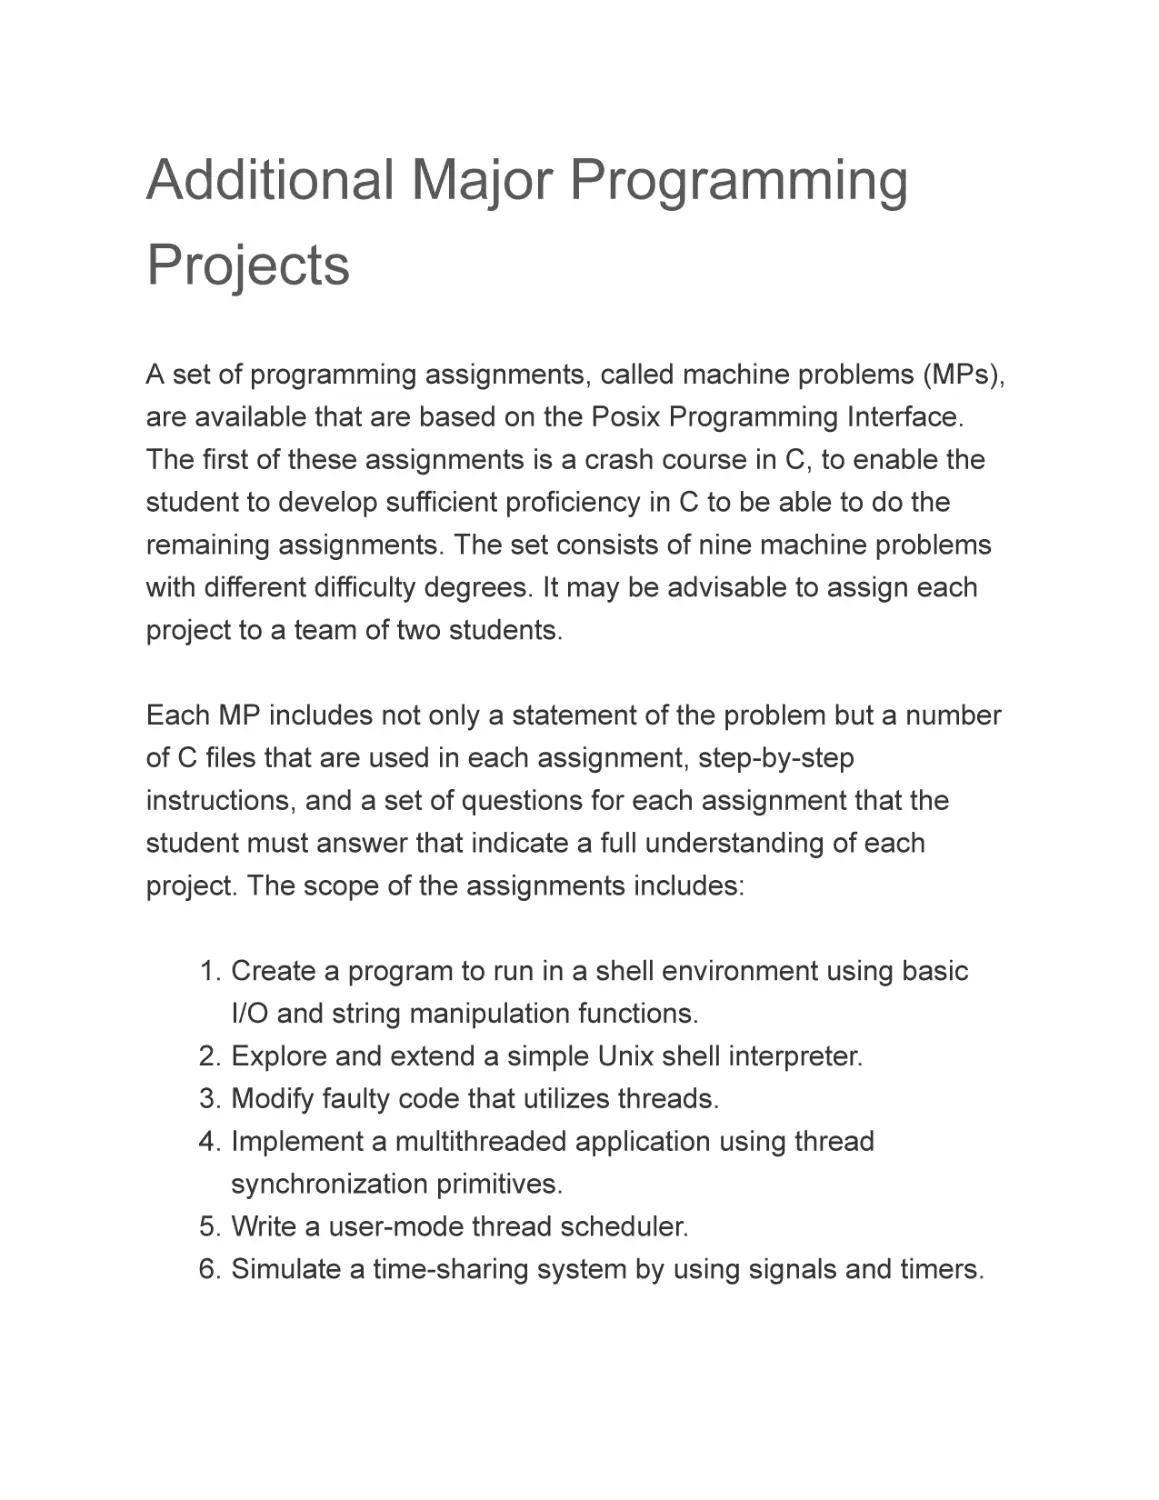 Additional Major Programming Projects